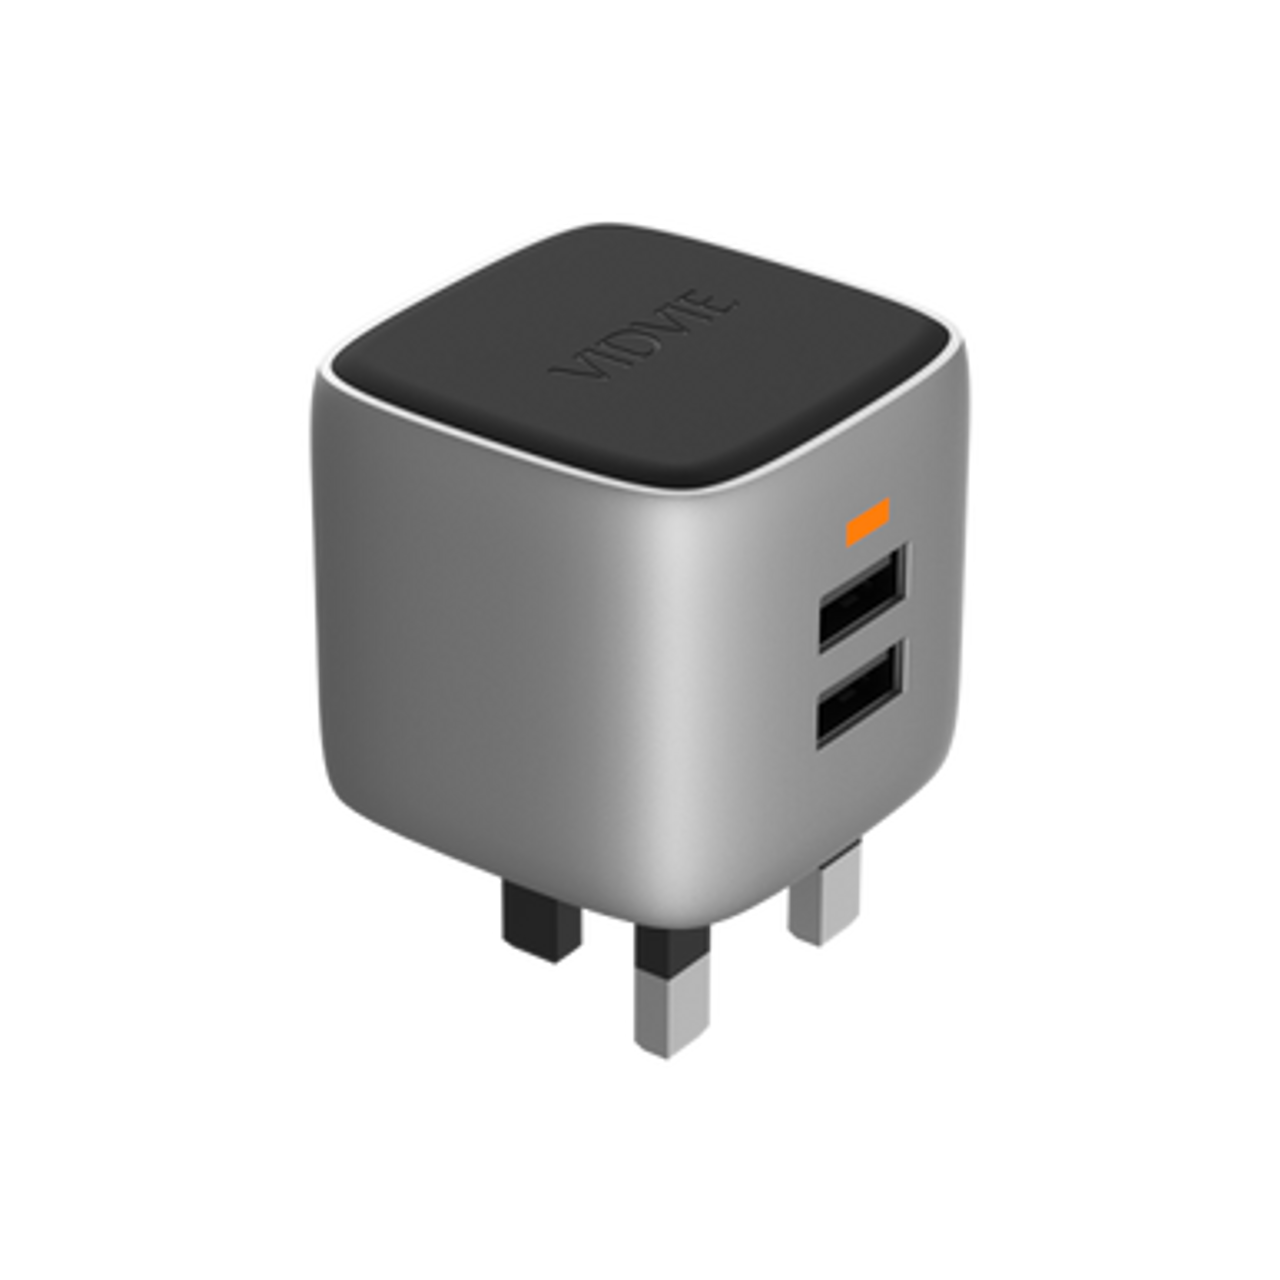 Vidvie 2-Way charging adaptor with 2 USB ports and built-in surge protection